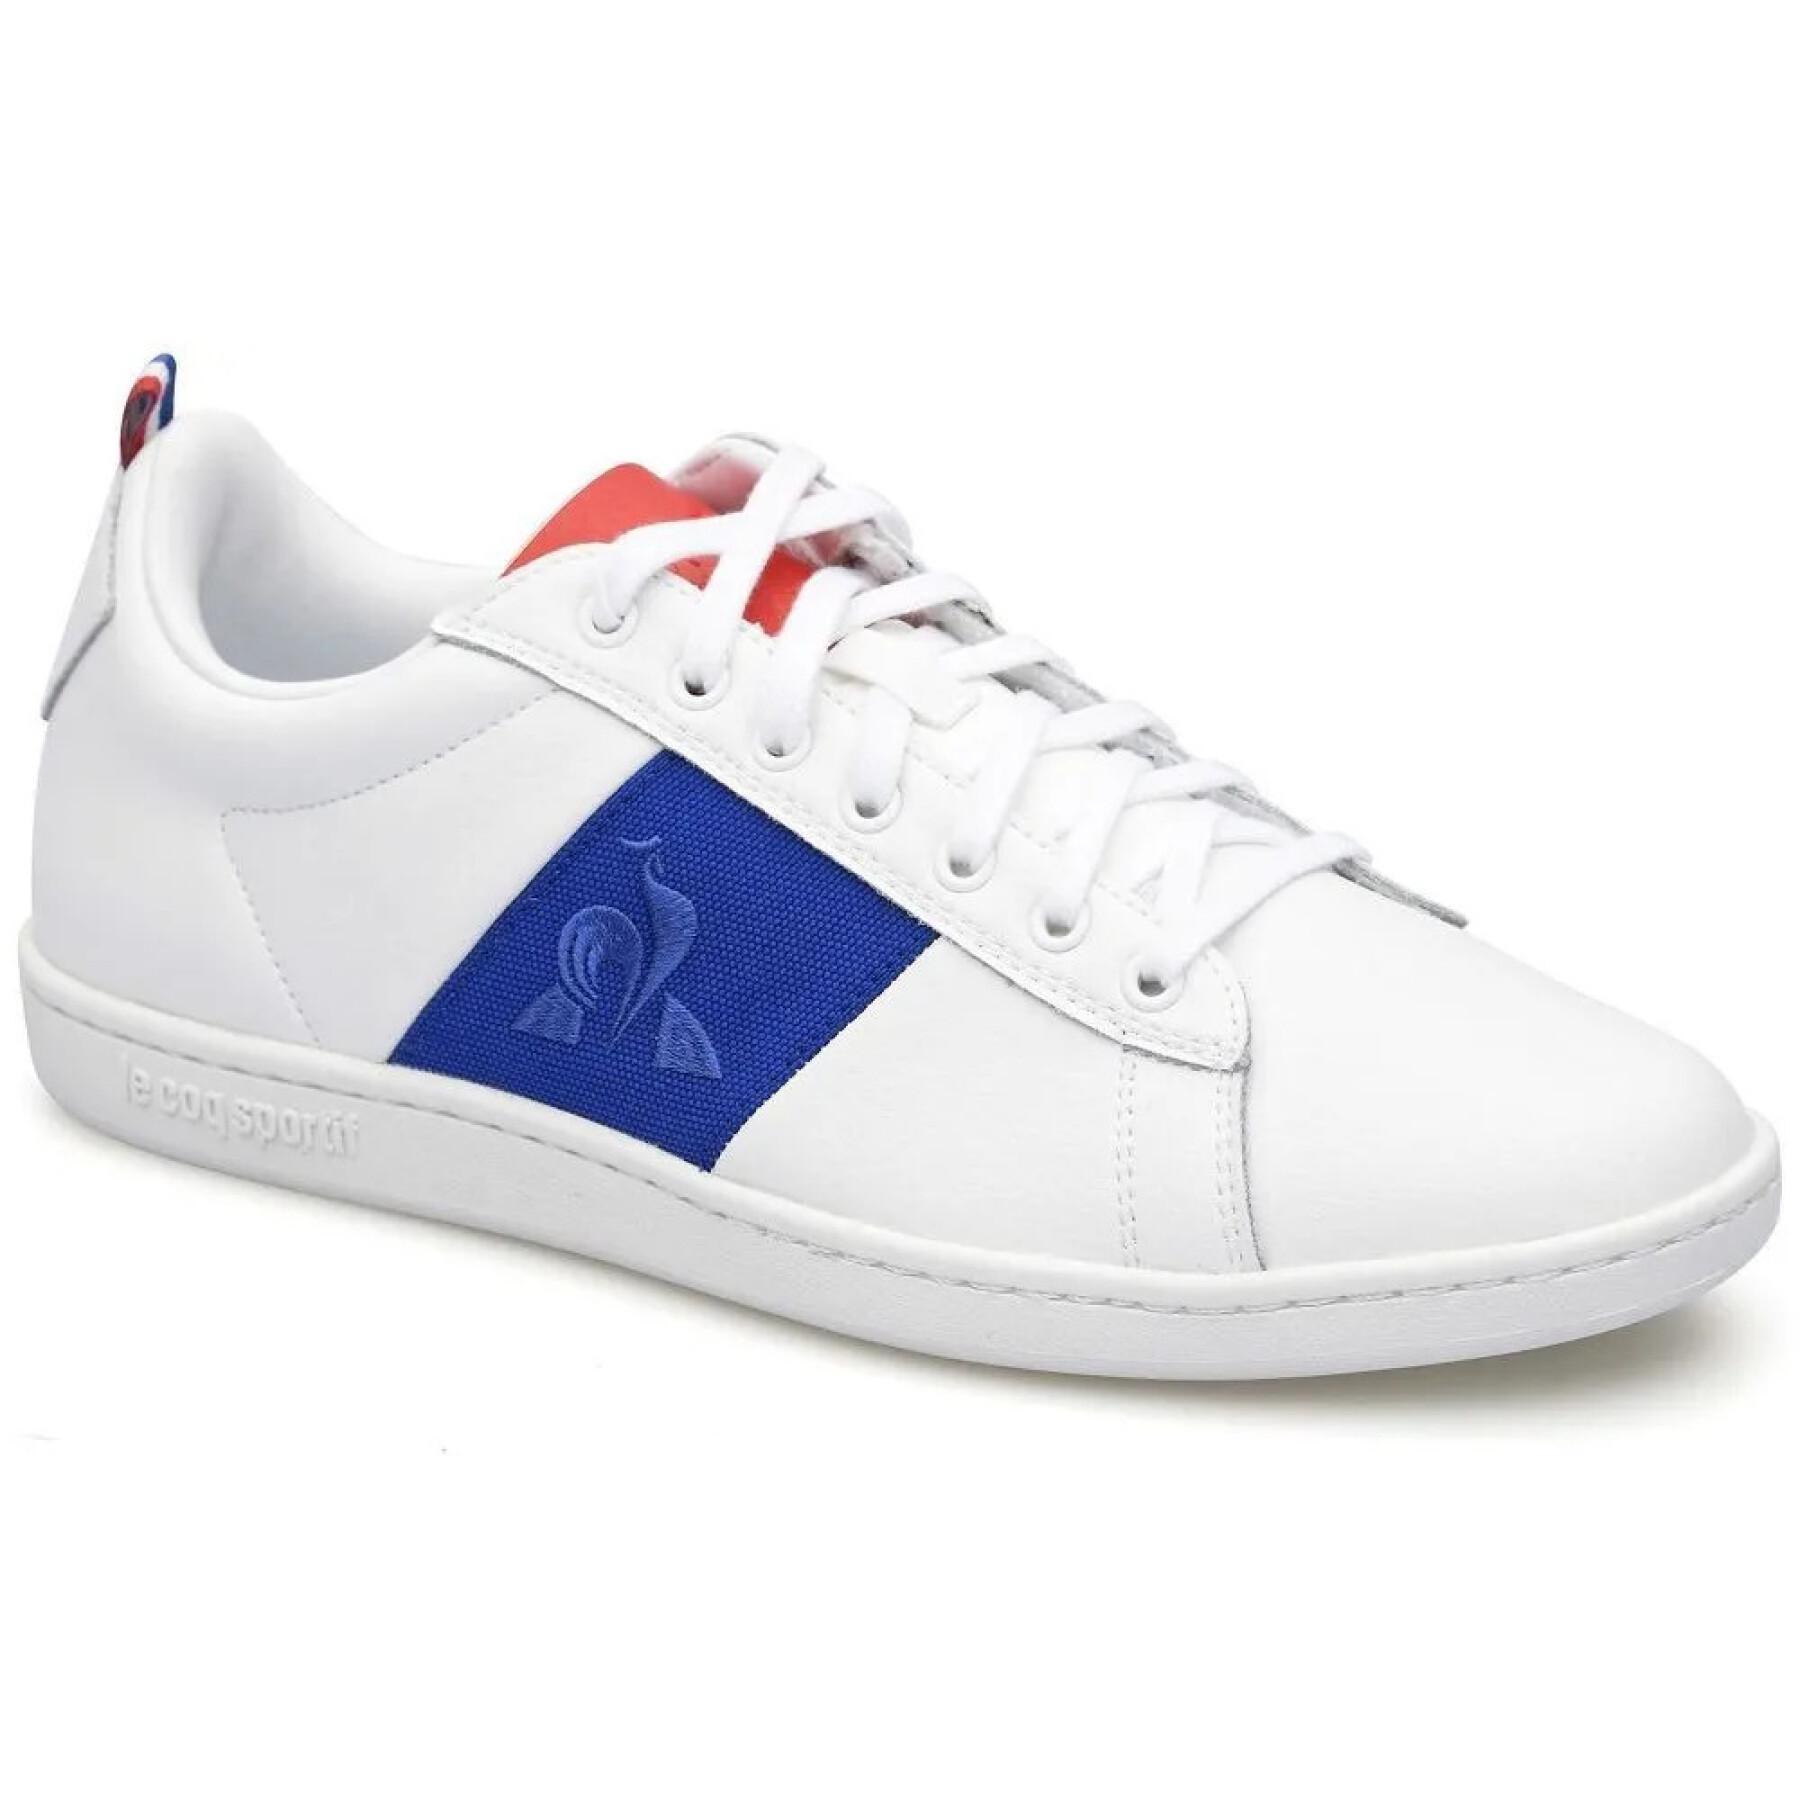 Formadores Le Coq Sportif Courtclassic bbr